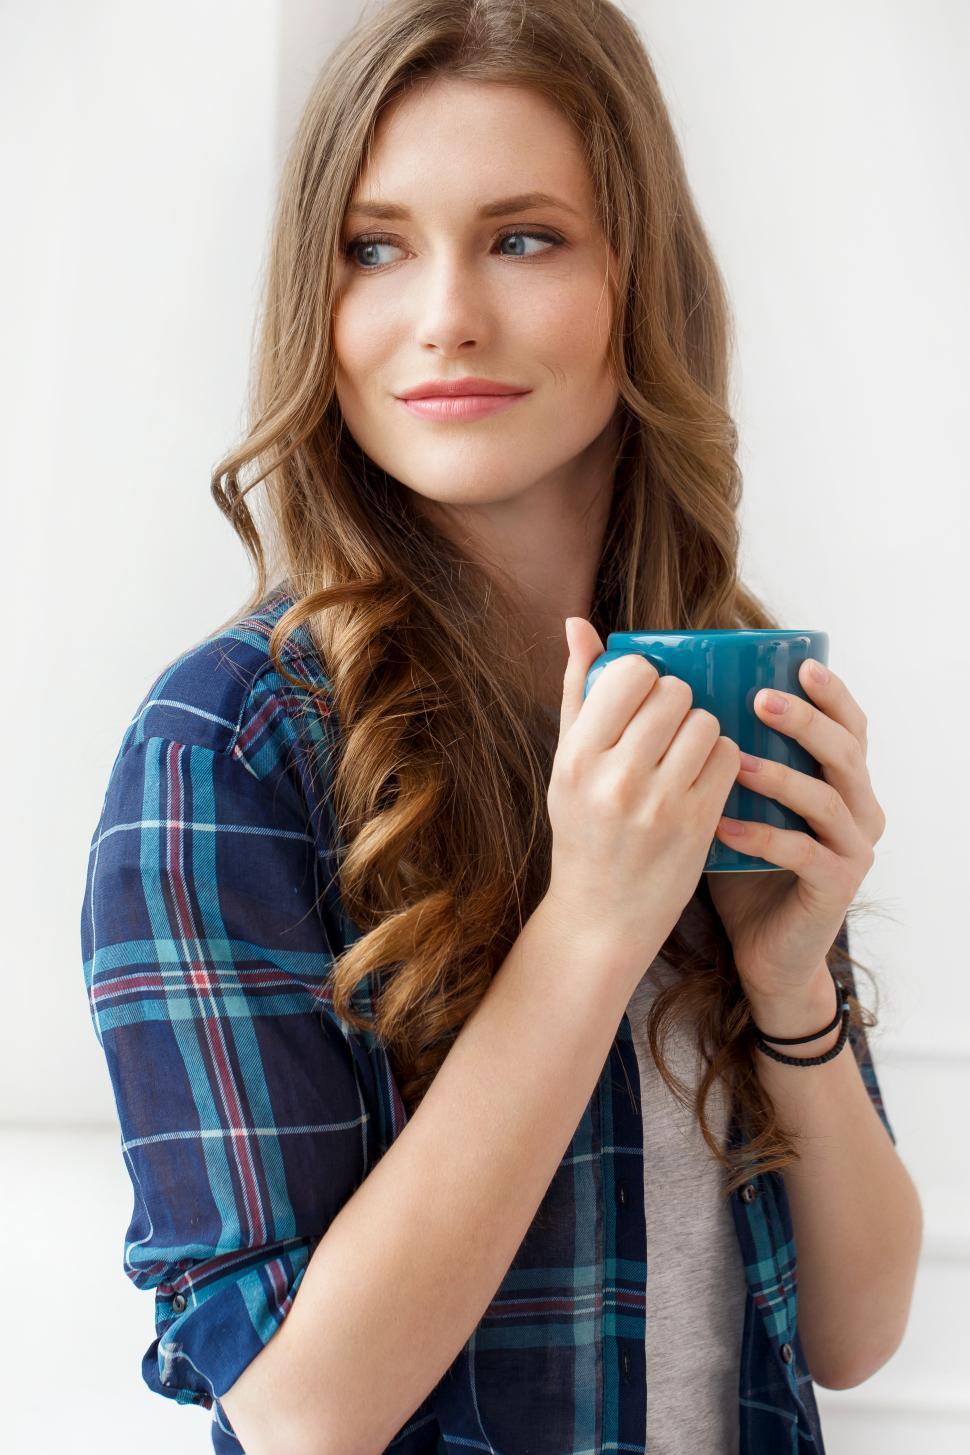 Free Image of Attractive girl looking out the window, holding mug 